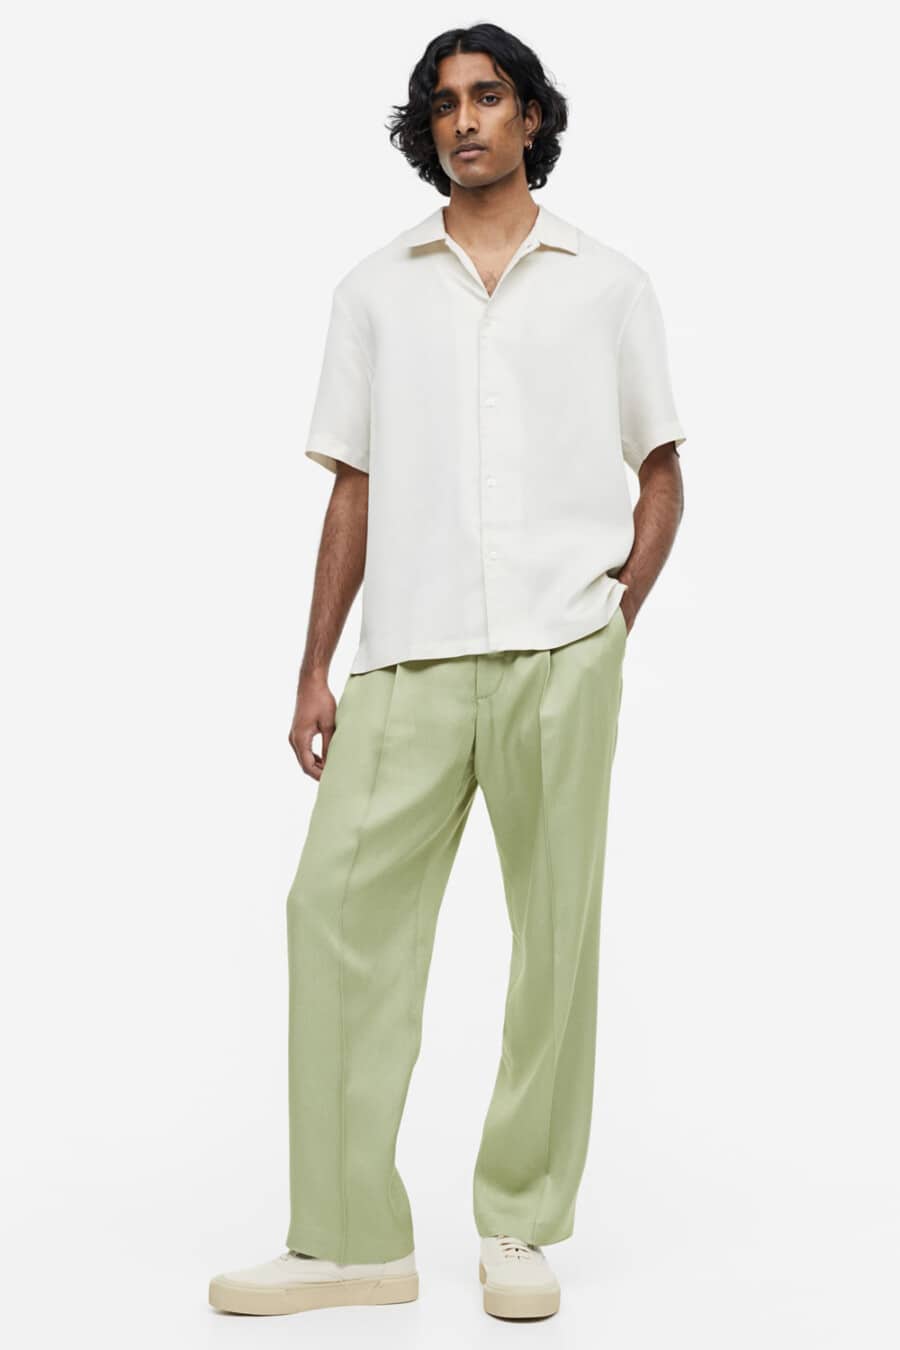 Men's light green wide-leg pants, white short sleeve shirt and chunky white canvas sneakers outfit